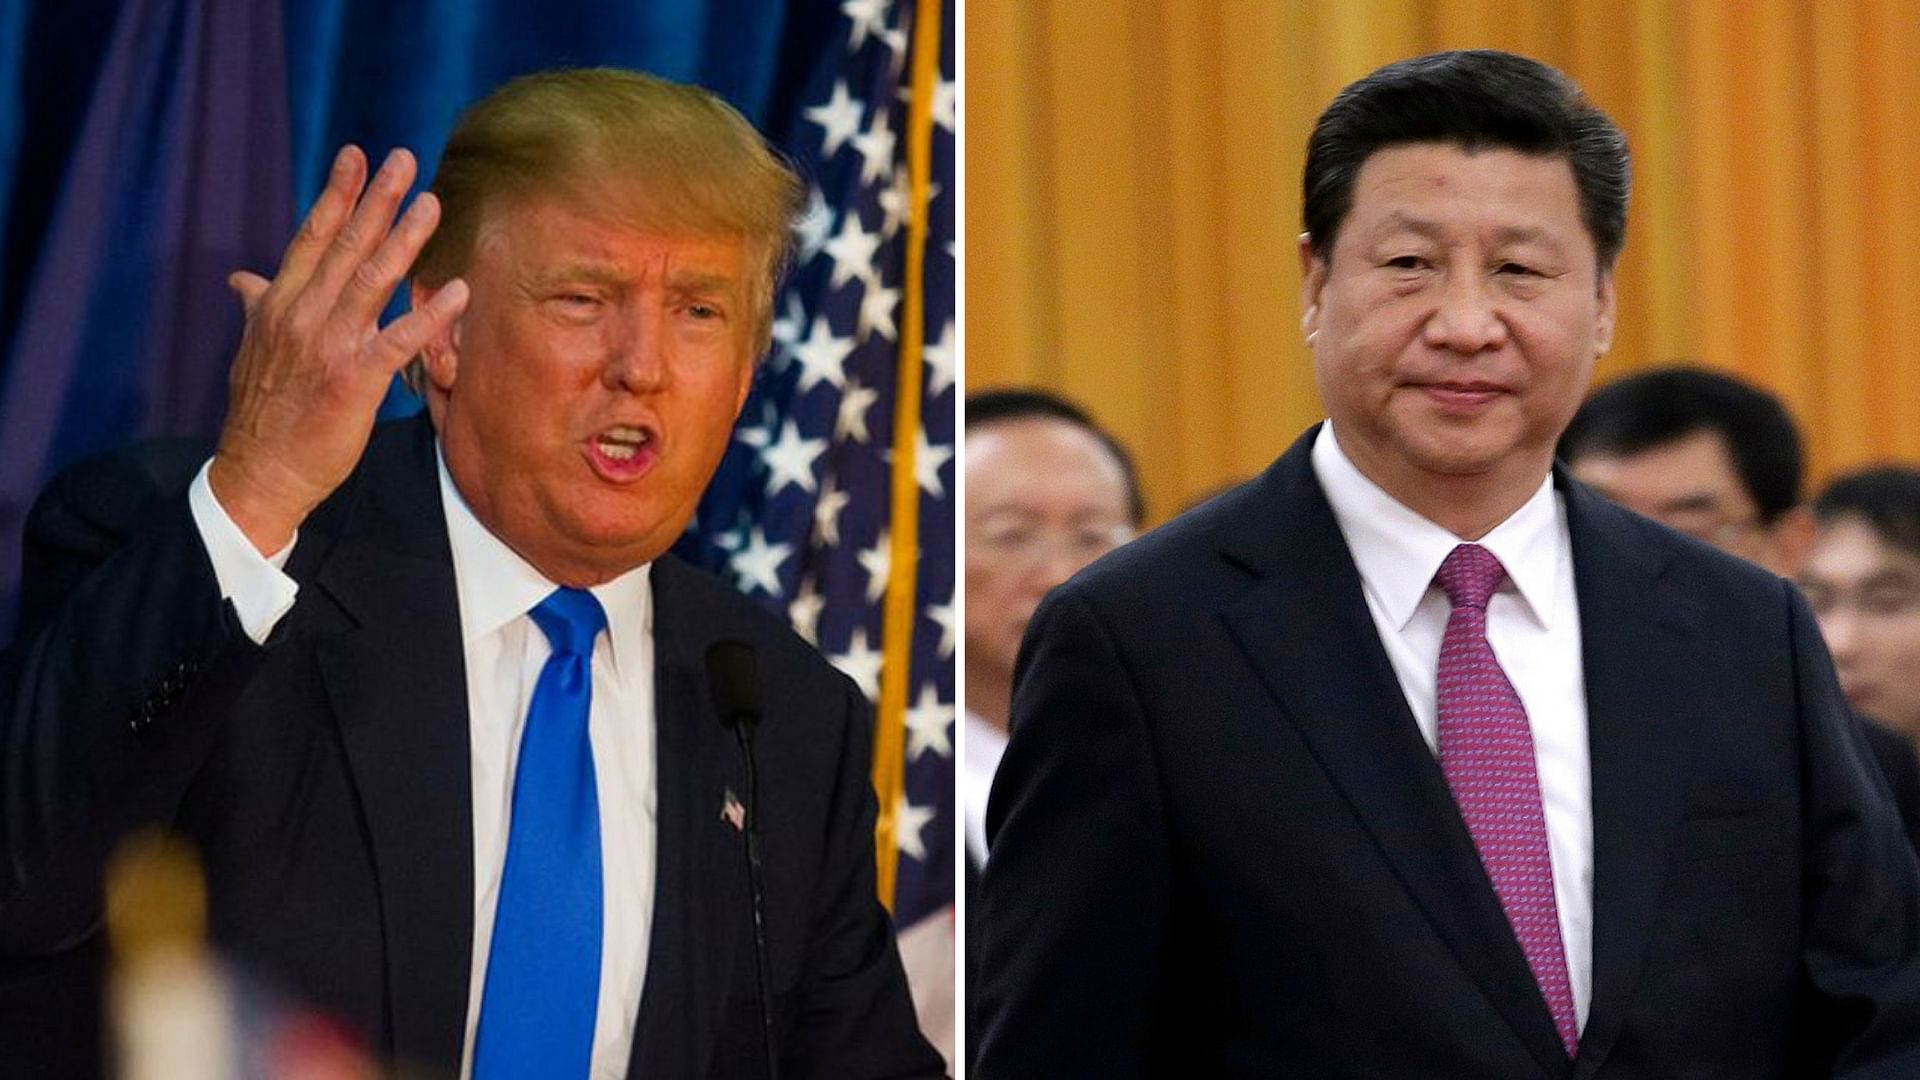 President Donald Trump recently escalated his trade war with China, threatening to impose a 10% tariff on the <a href="https://www.bbc.com/news/business-49199559">remaining US$300 billion</a> of untaxed Chinese imports.